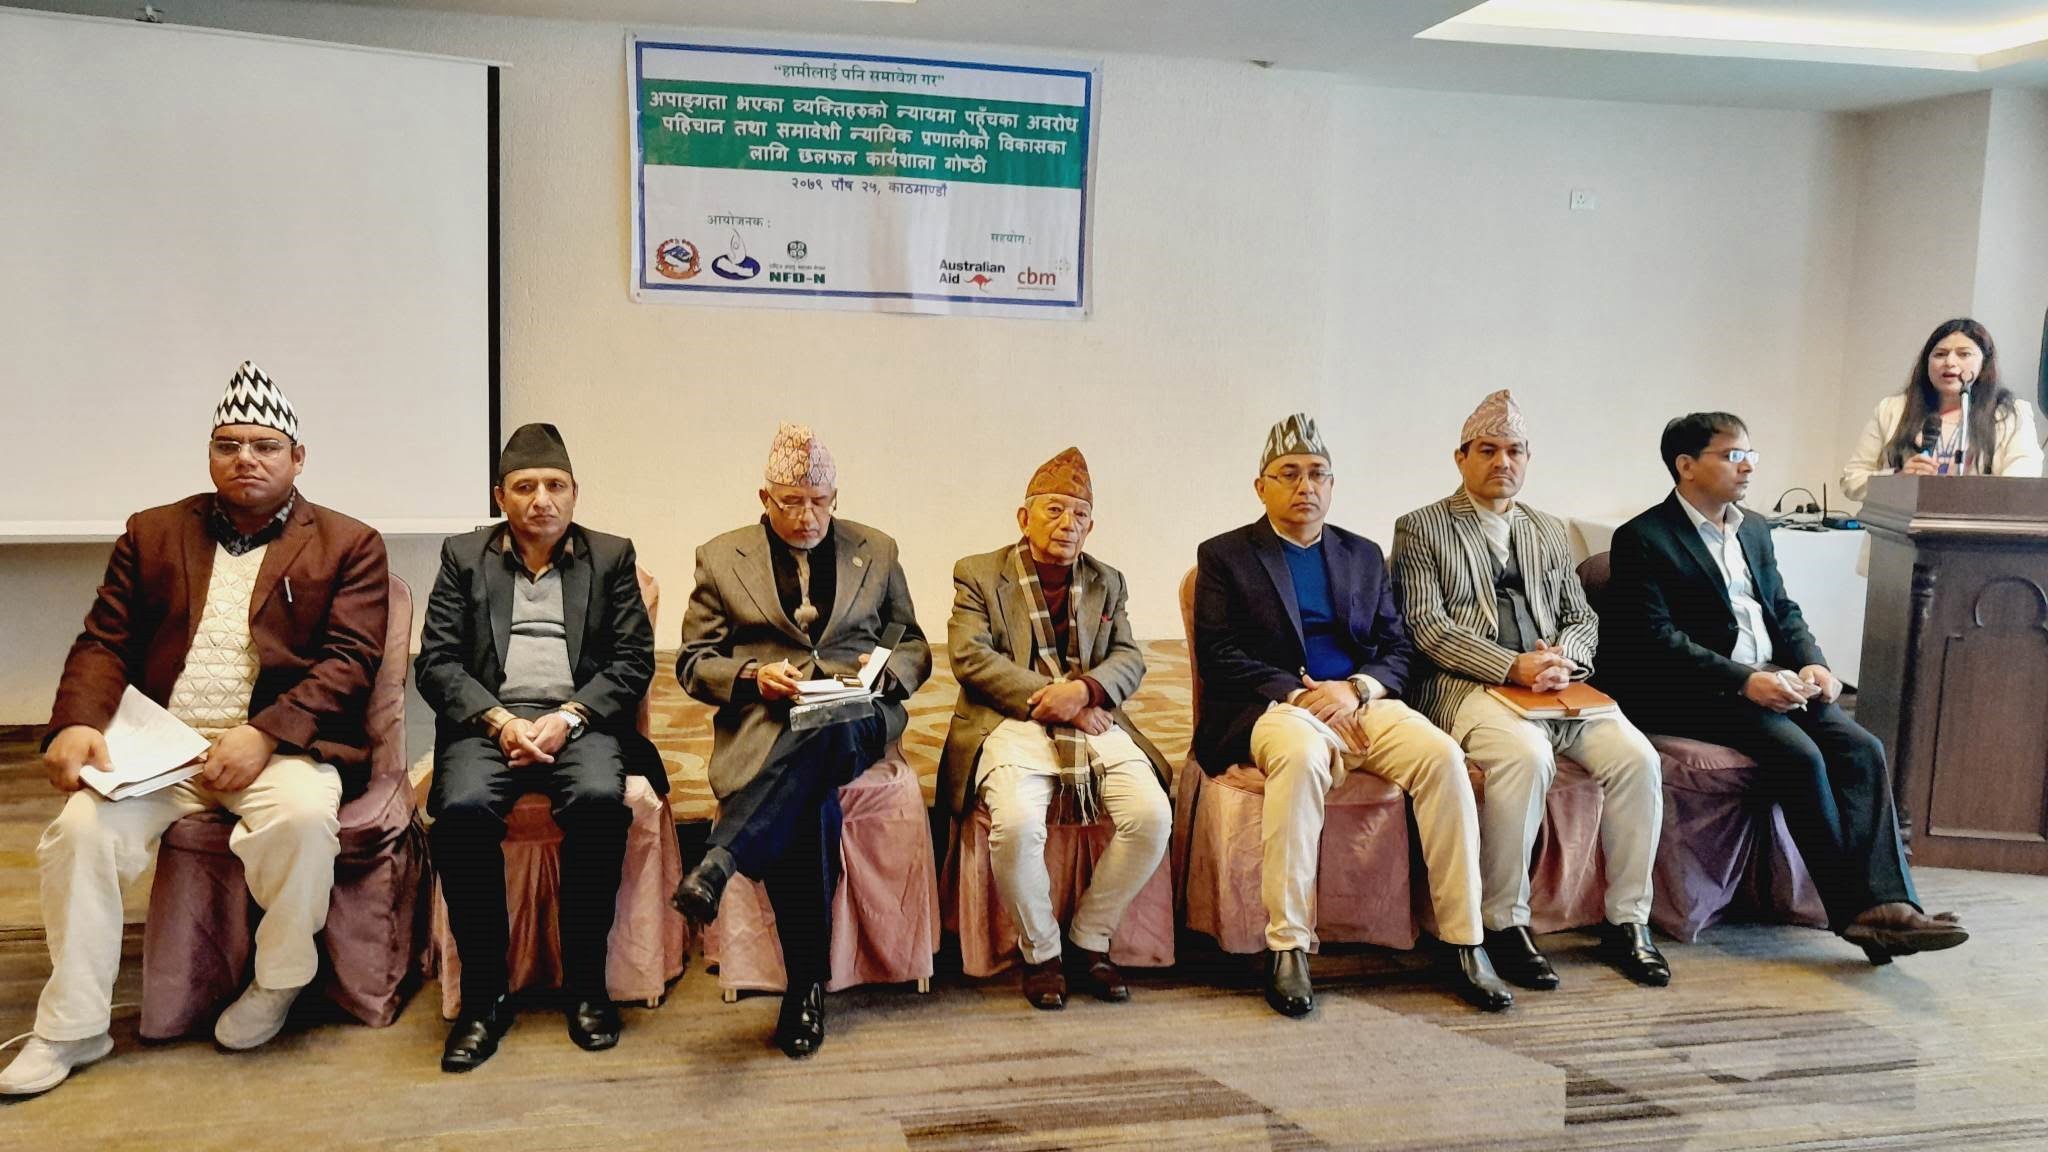 In this picture, 7 male and 1 femlae can be seen. In the chief guest of Top Bahadur Magar-president of NHRC, president of NFDN, DAO of Justice system Jay Narayan Acharya, Disability focal person of NHRC Ms. Kalpana Nepal can be seen in a picture. 6 of them are wearing hat and a banner of a program can be seen behind them.